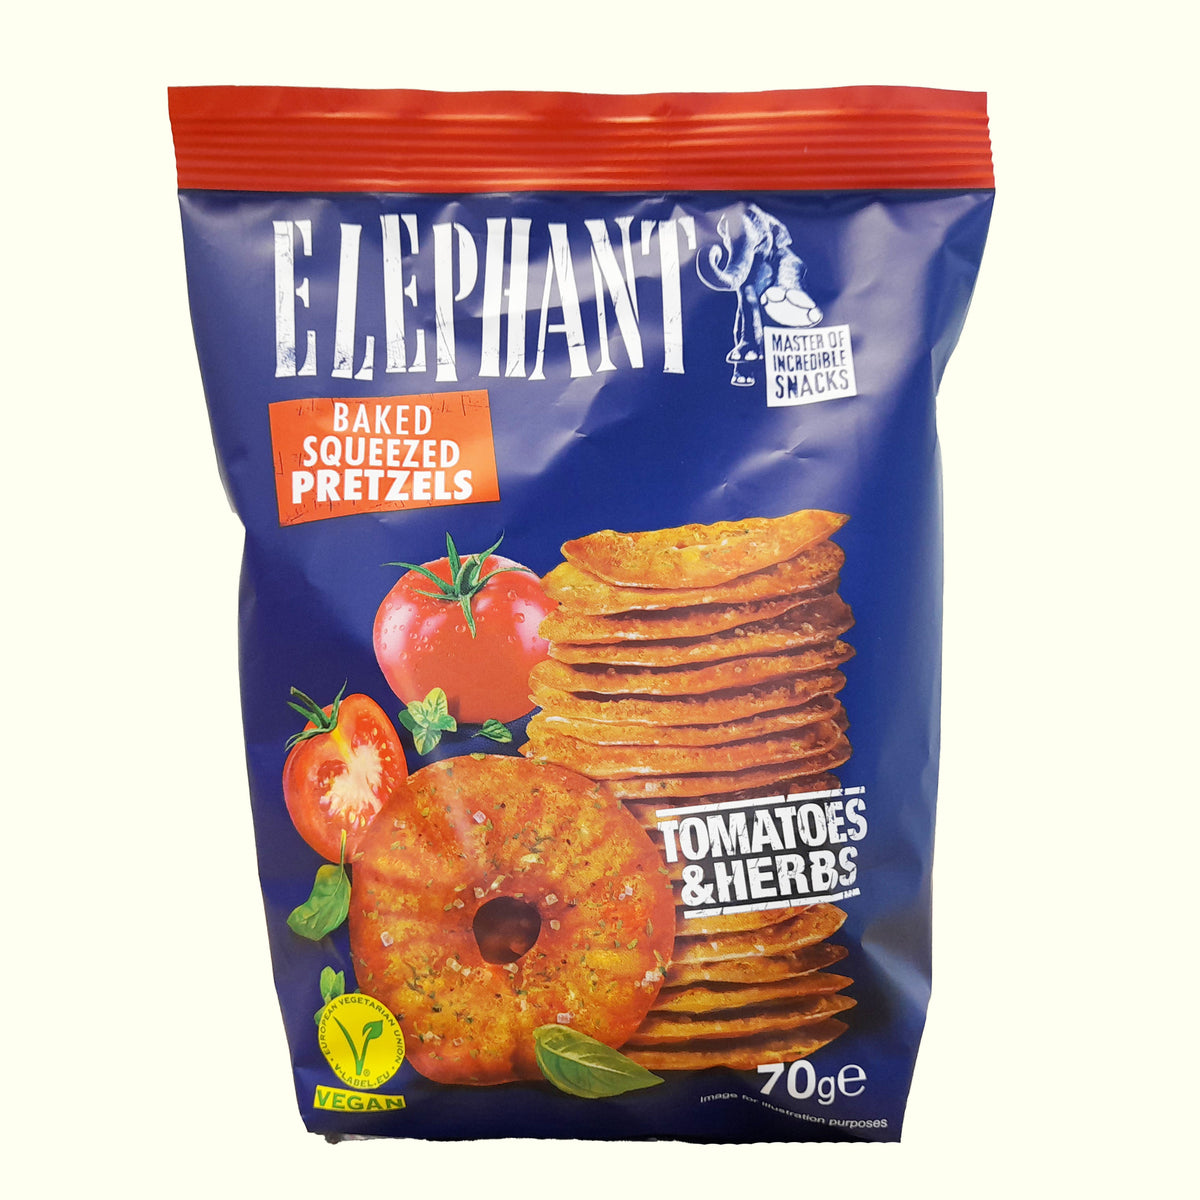 Elephant Squeezed Pretzels Tomatoes & Herbs 70g